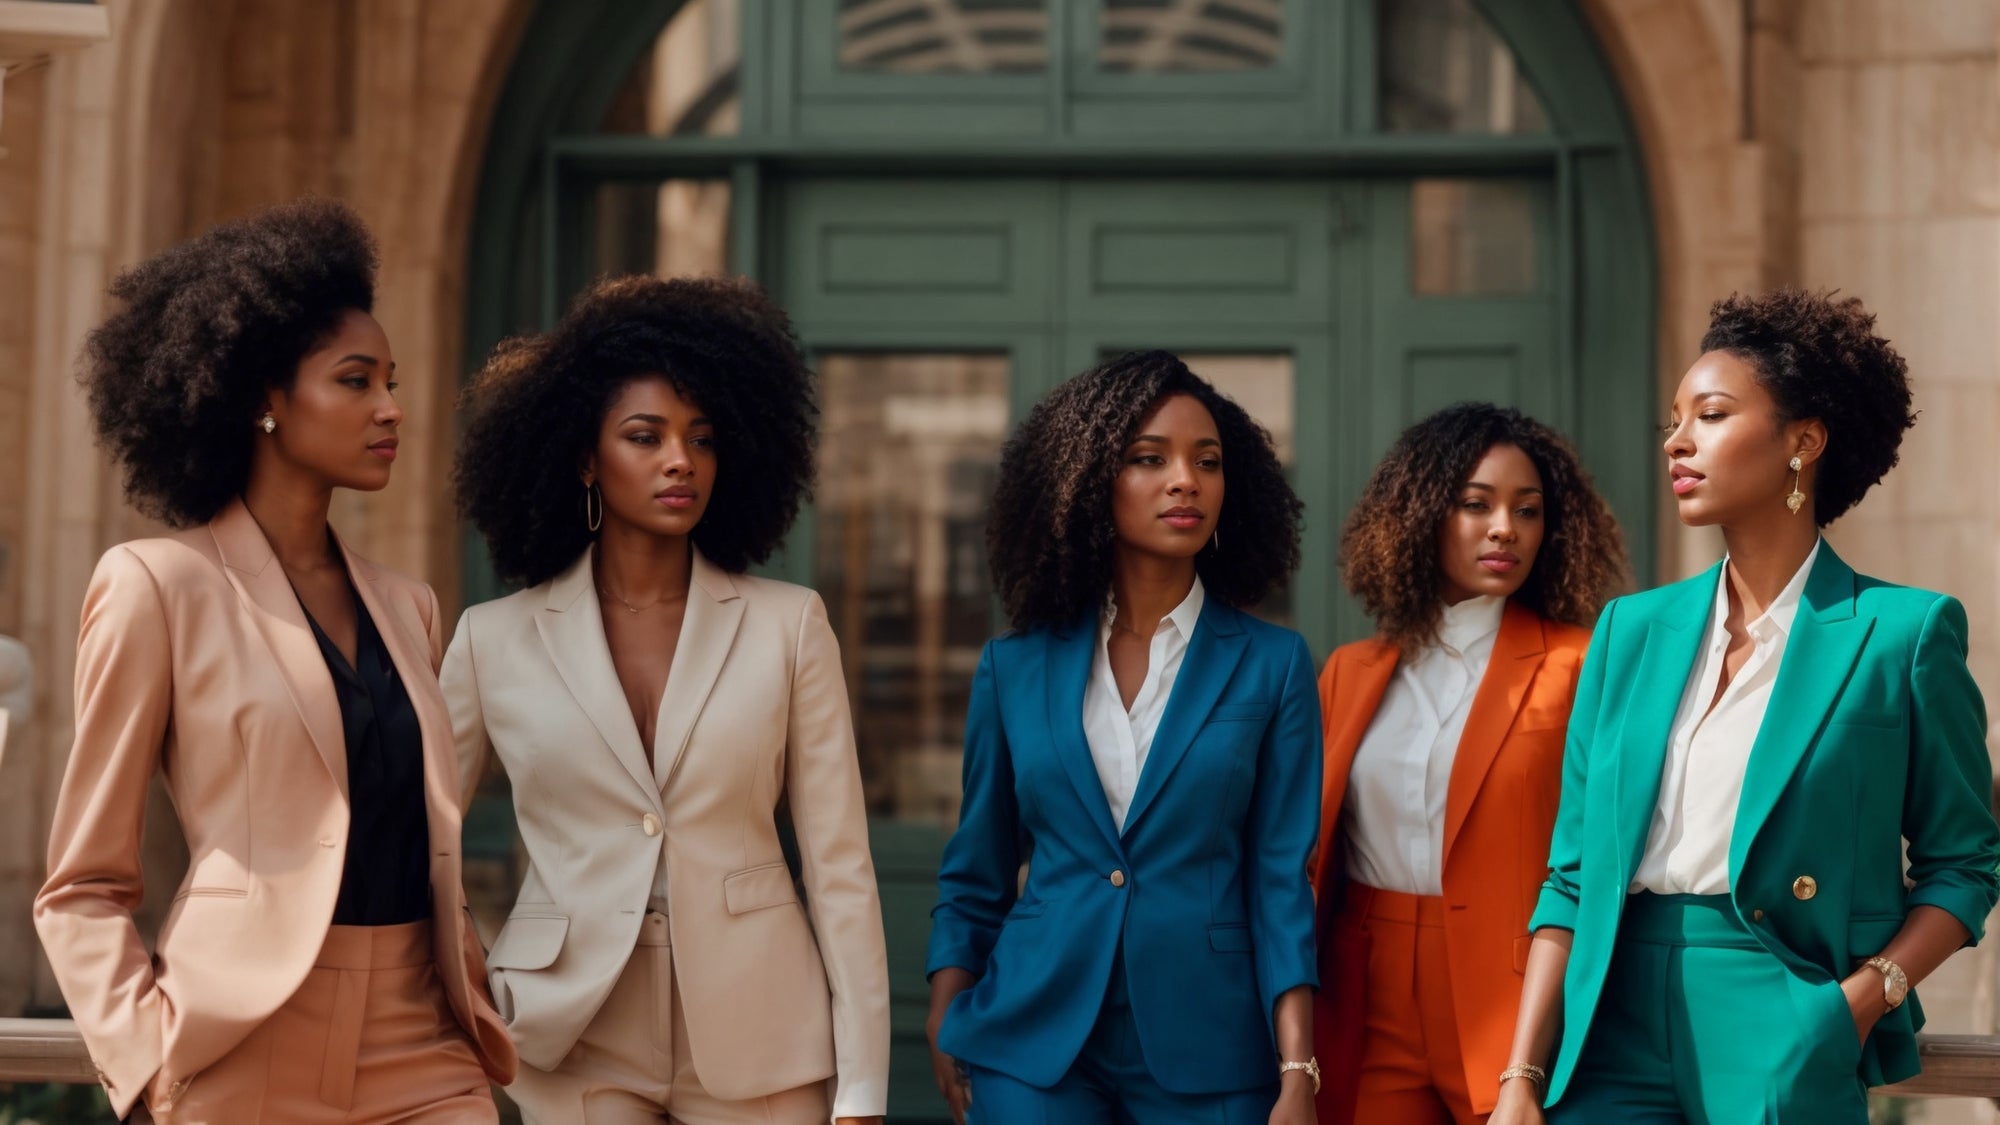 Making an Impression for the New: Women Pantsuits for Professional Business Attire